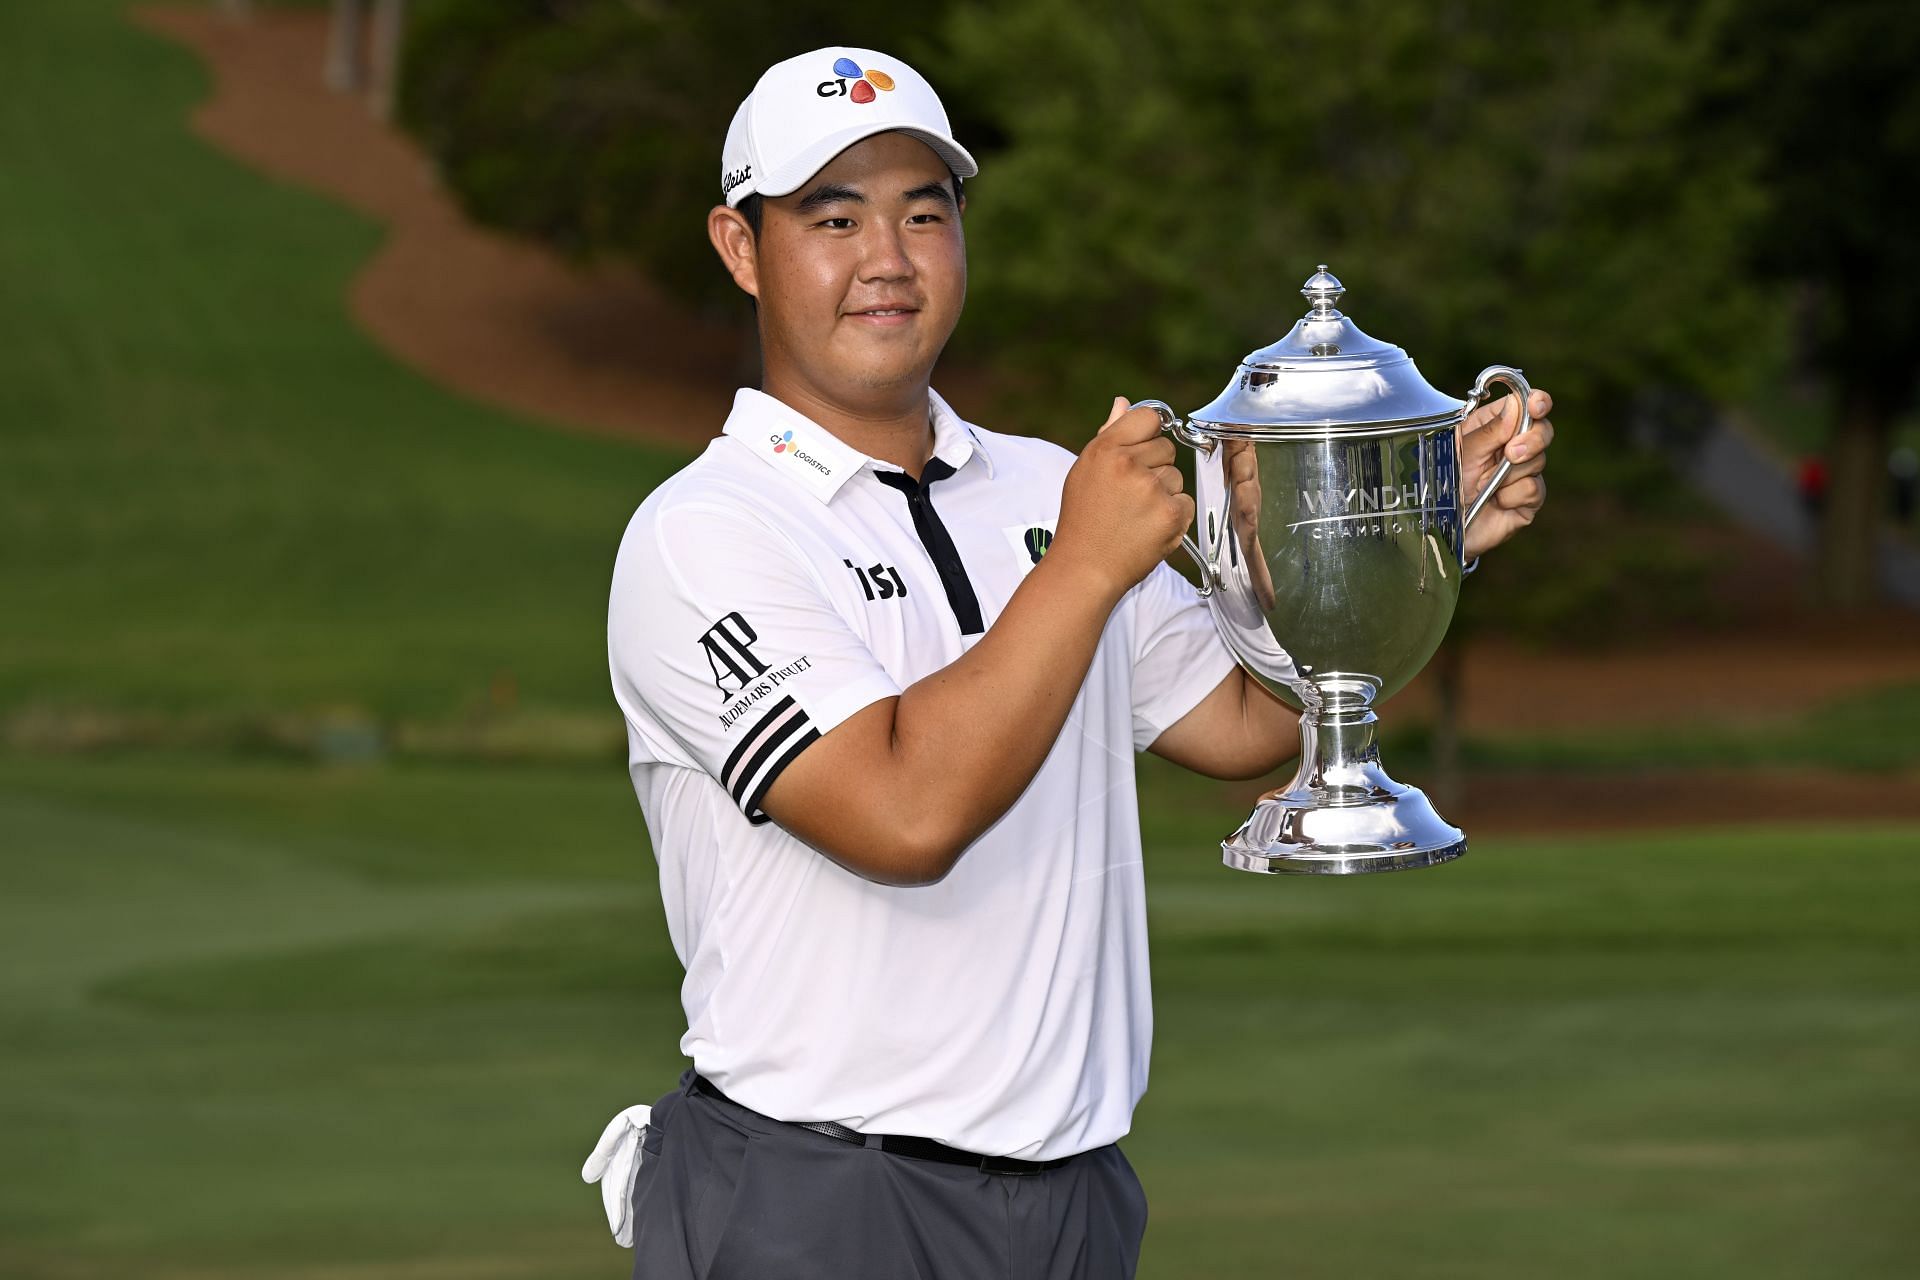 Tom Kim with the Wyndham Championship trophy, 2022 (via Getty Images)